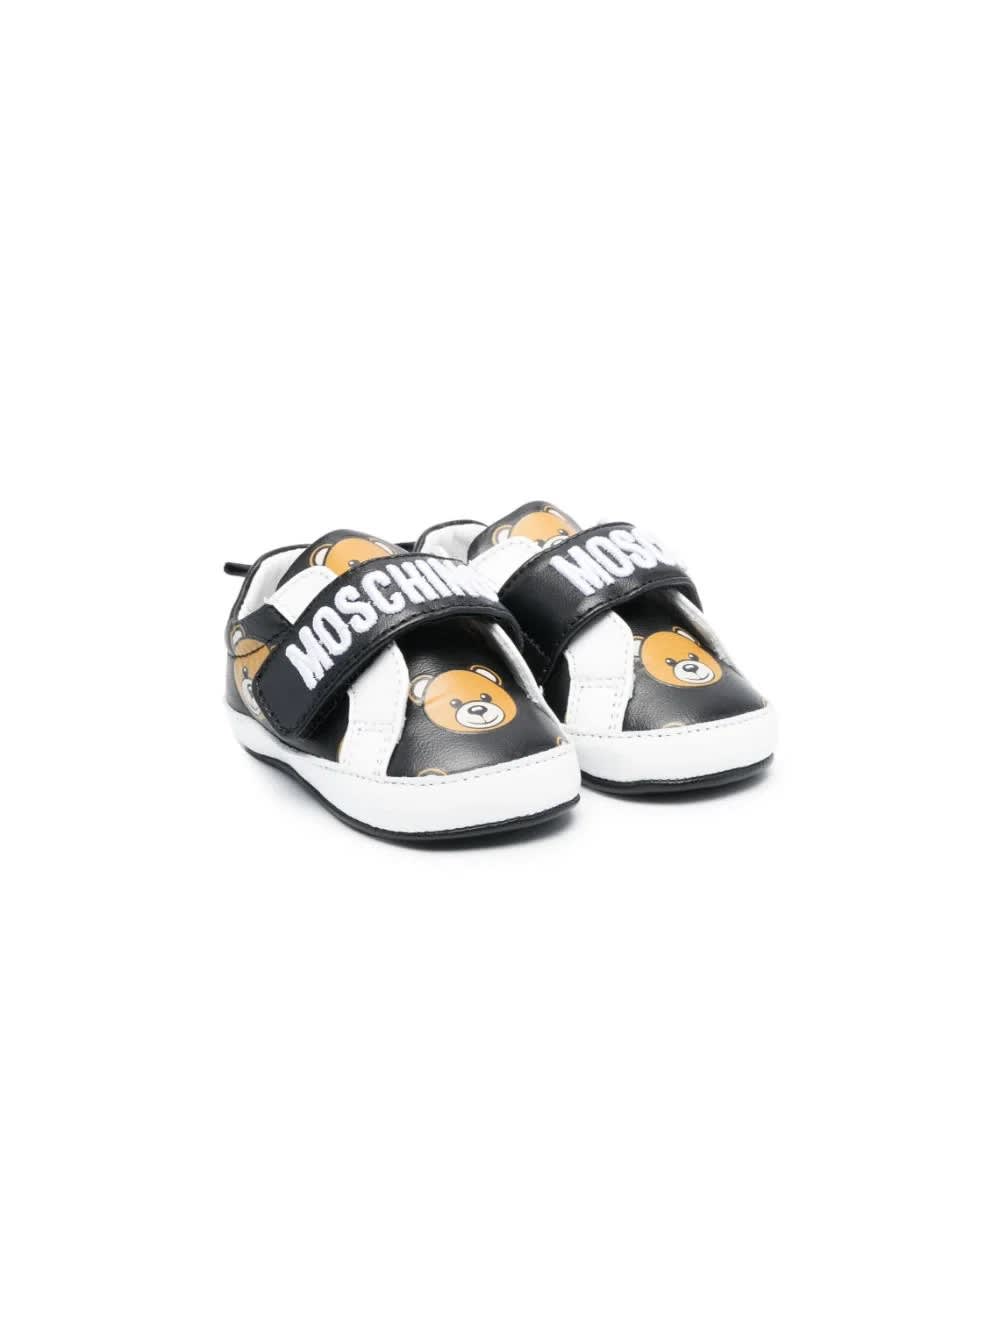 Moschino Kids' Teddy Bear Sneakers With Print In Black